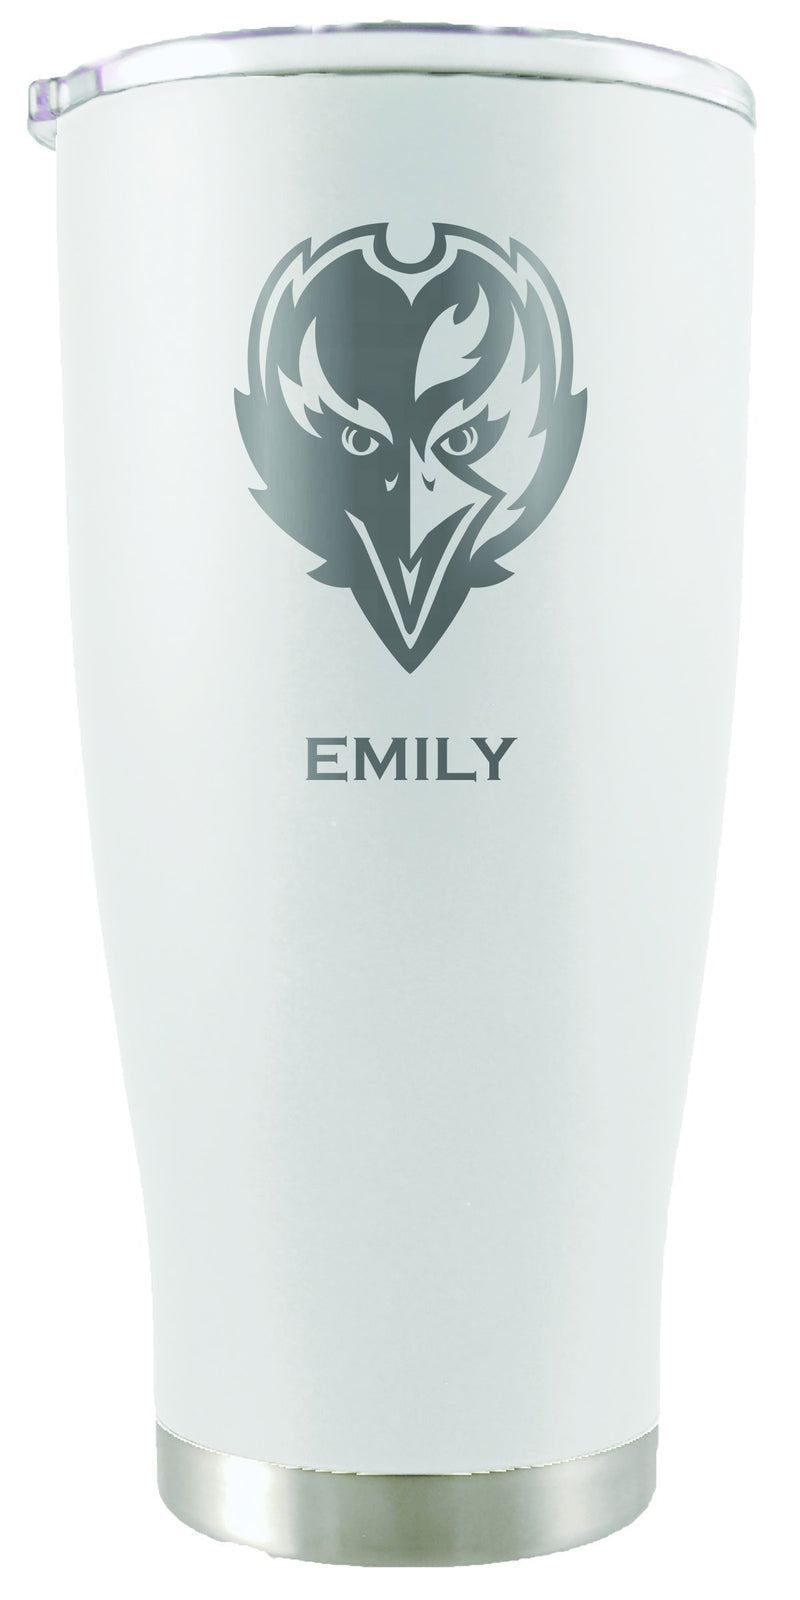 20oz White Personalized Stainless Steel Tumbler | Baltimore Ravens
Baltimore Ravens, BRA, CurrentProduct, Drinkware_category_All, NFL, Personalized_Personalized, Stainless Steel
The Memory Company